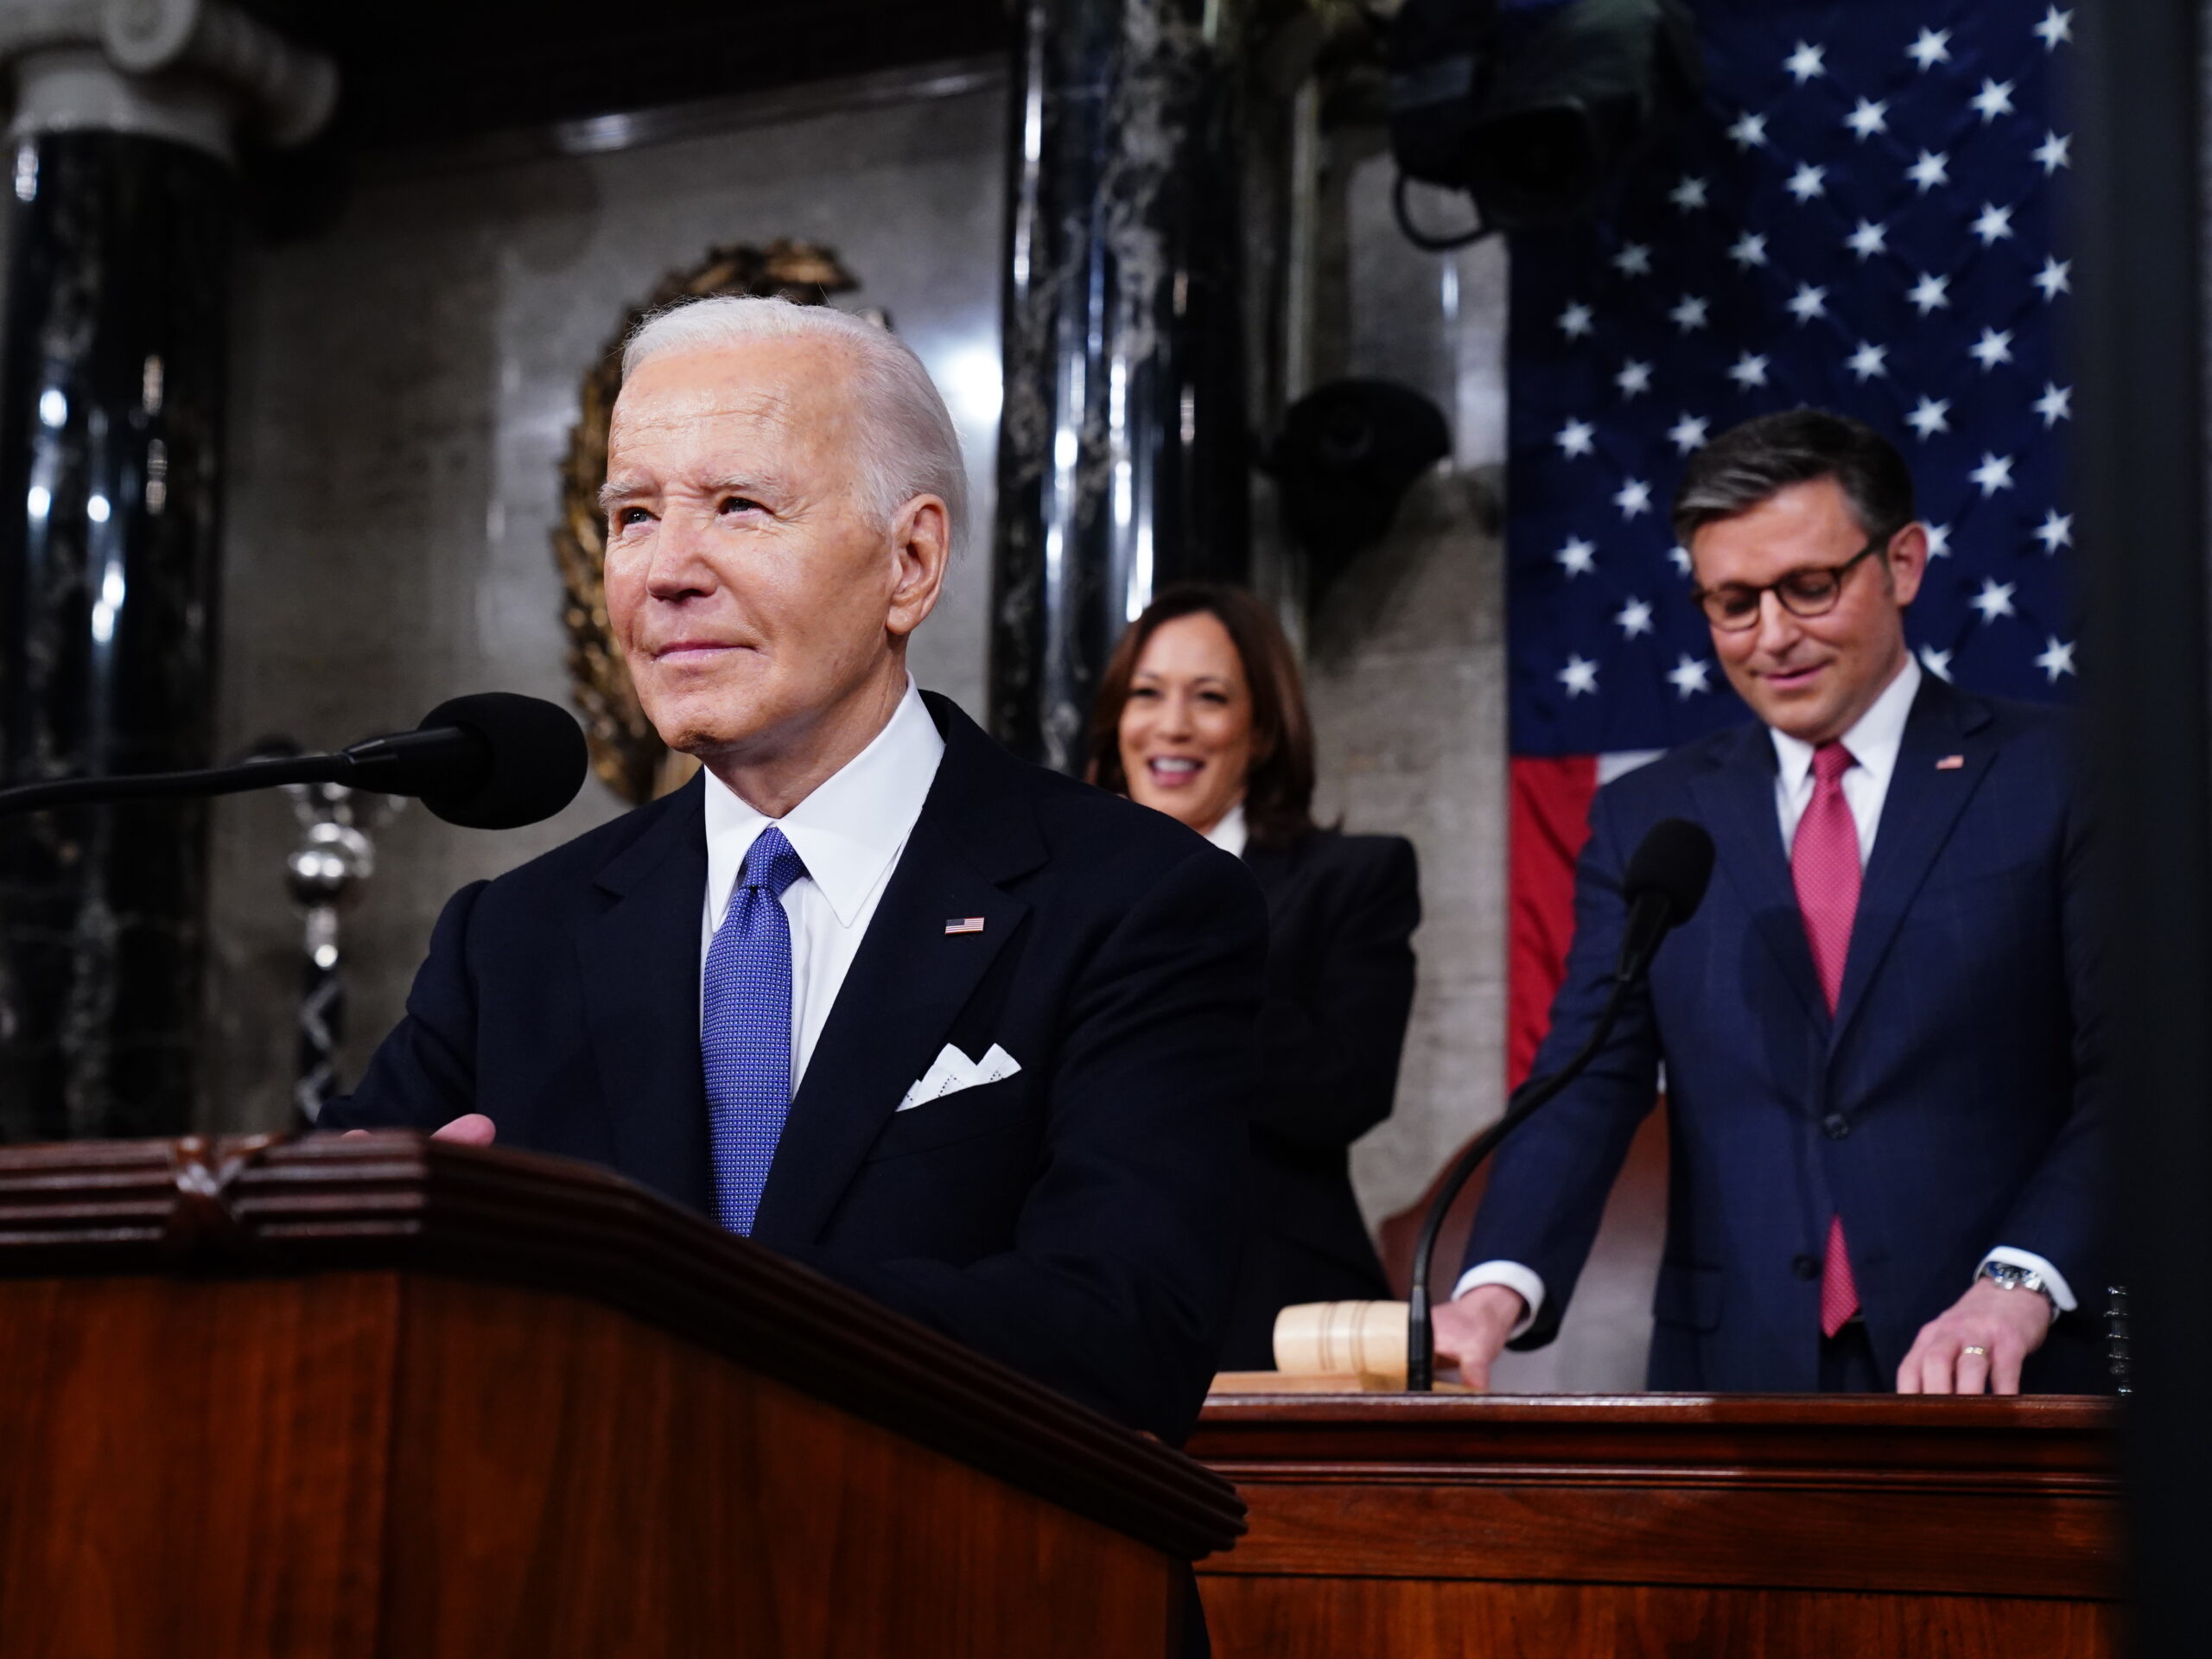 How to watch and listen to NPR’s coverage of Biden’s State of the Union speech